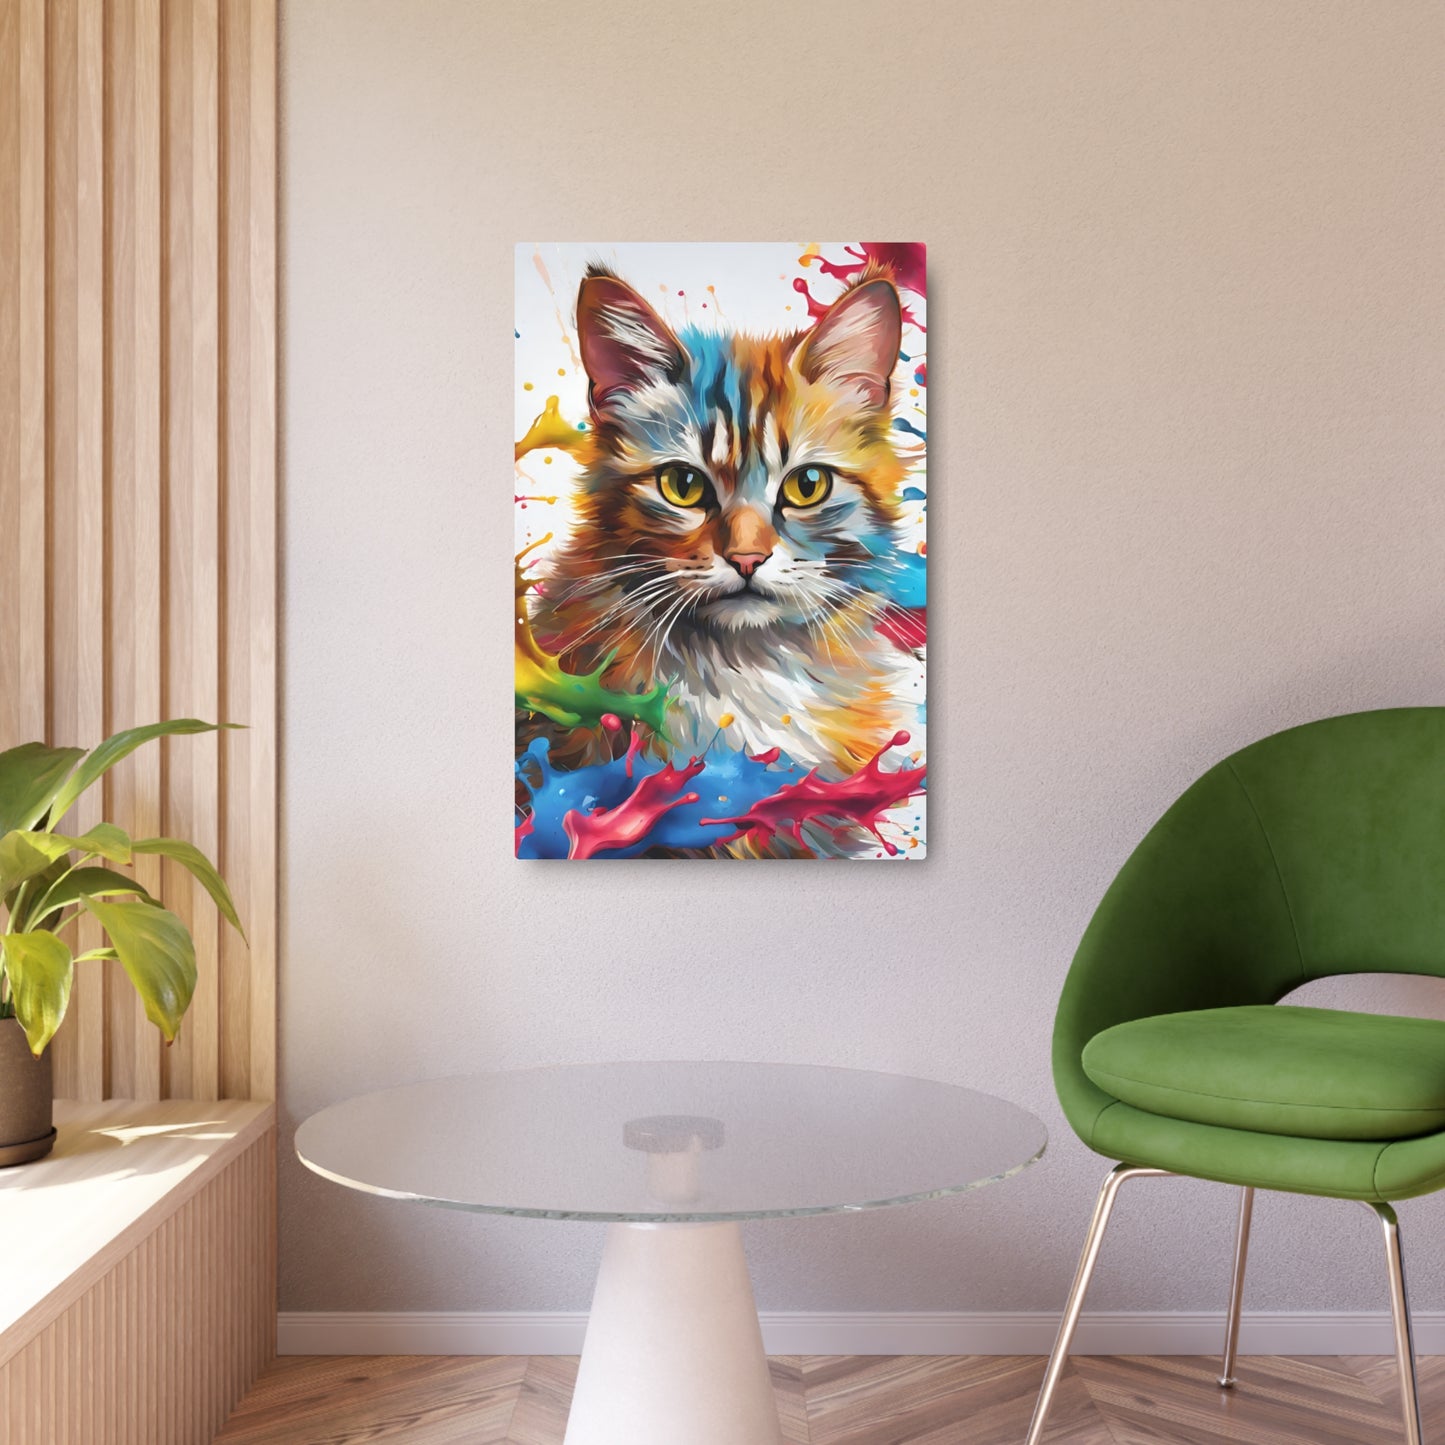 Metal Wall Art Decor featuring a Colorful Cat . Mounting tools included. Versatile Home Decor.